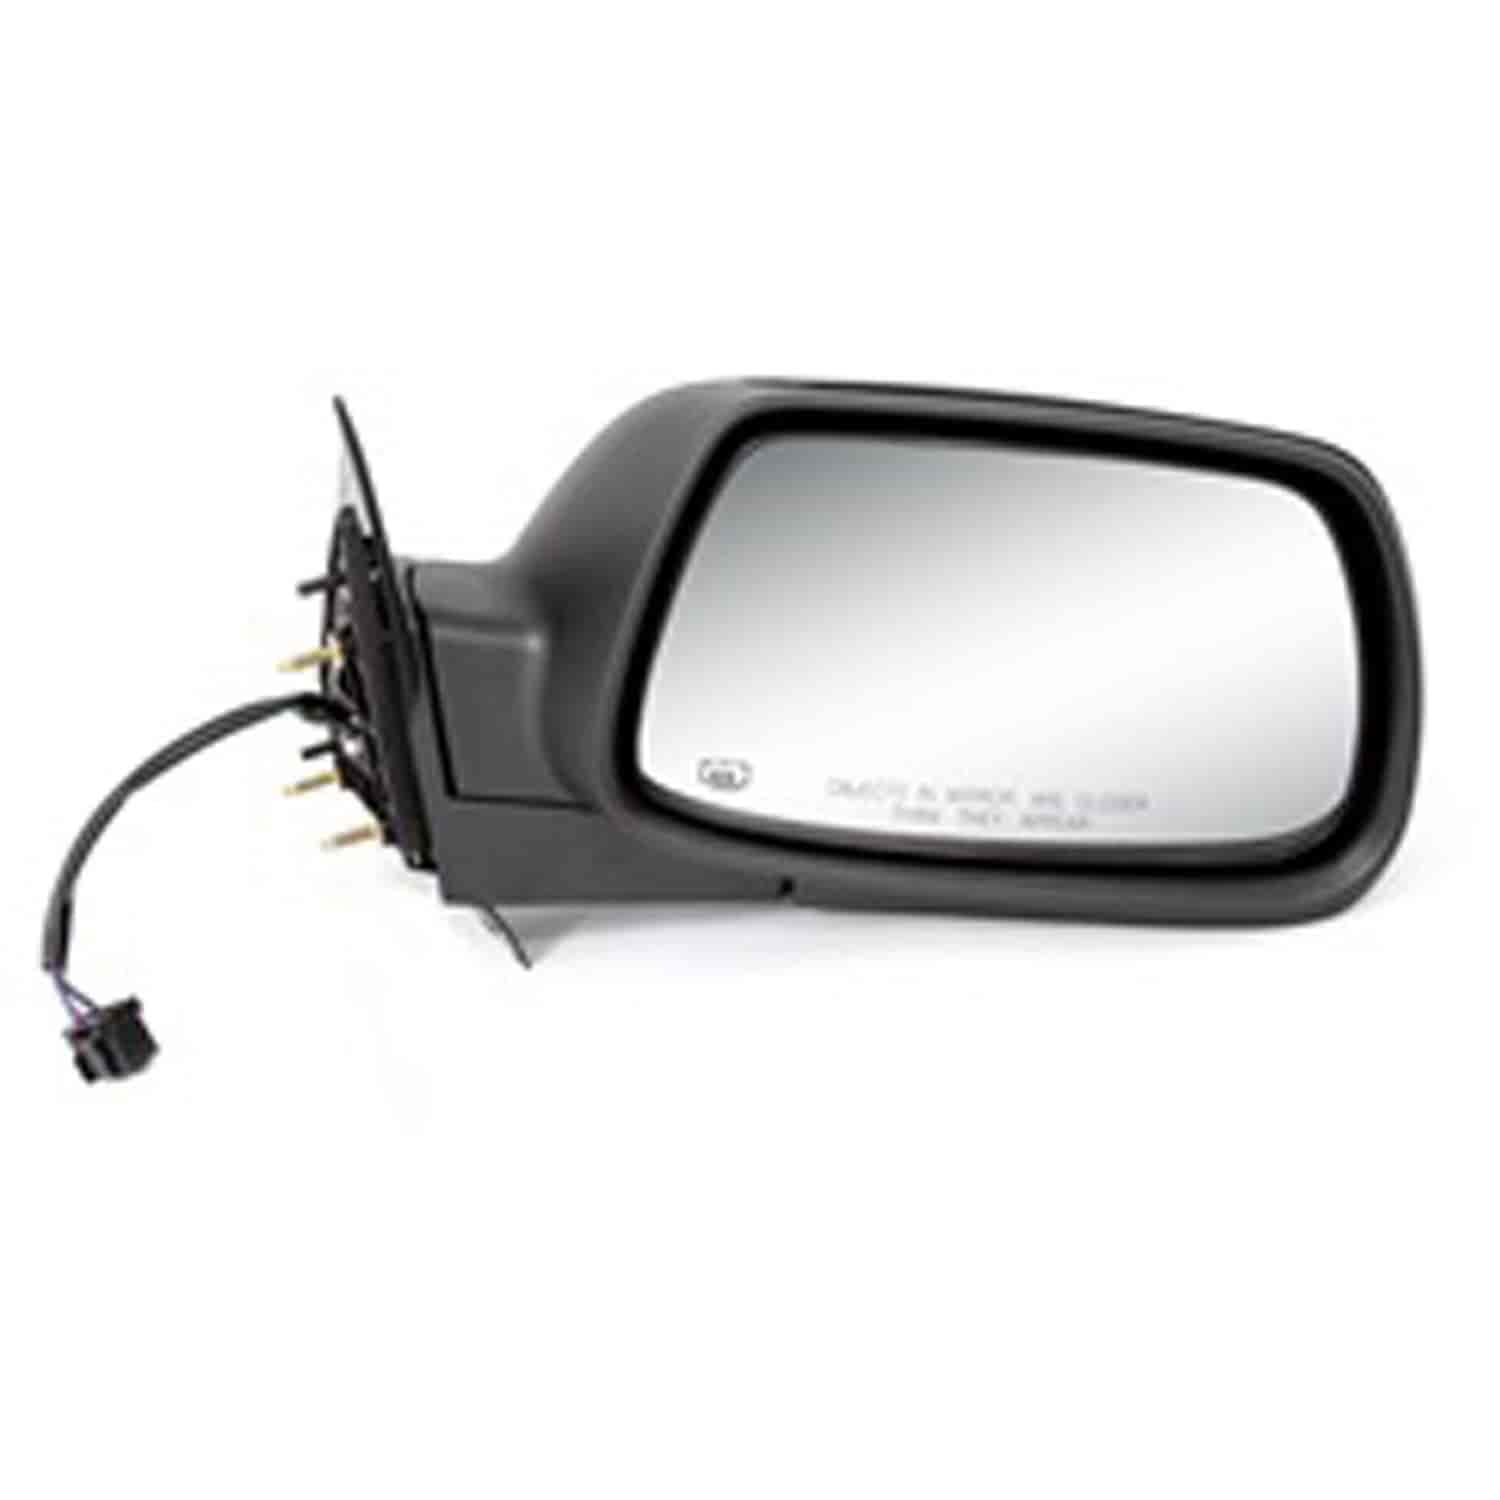 This black folding power door mirror from Omix-ADA is heated and fits the right door on 05-10 Jeep Grand Cherokee WK.